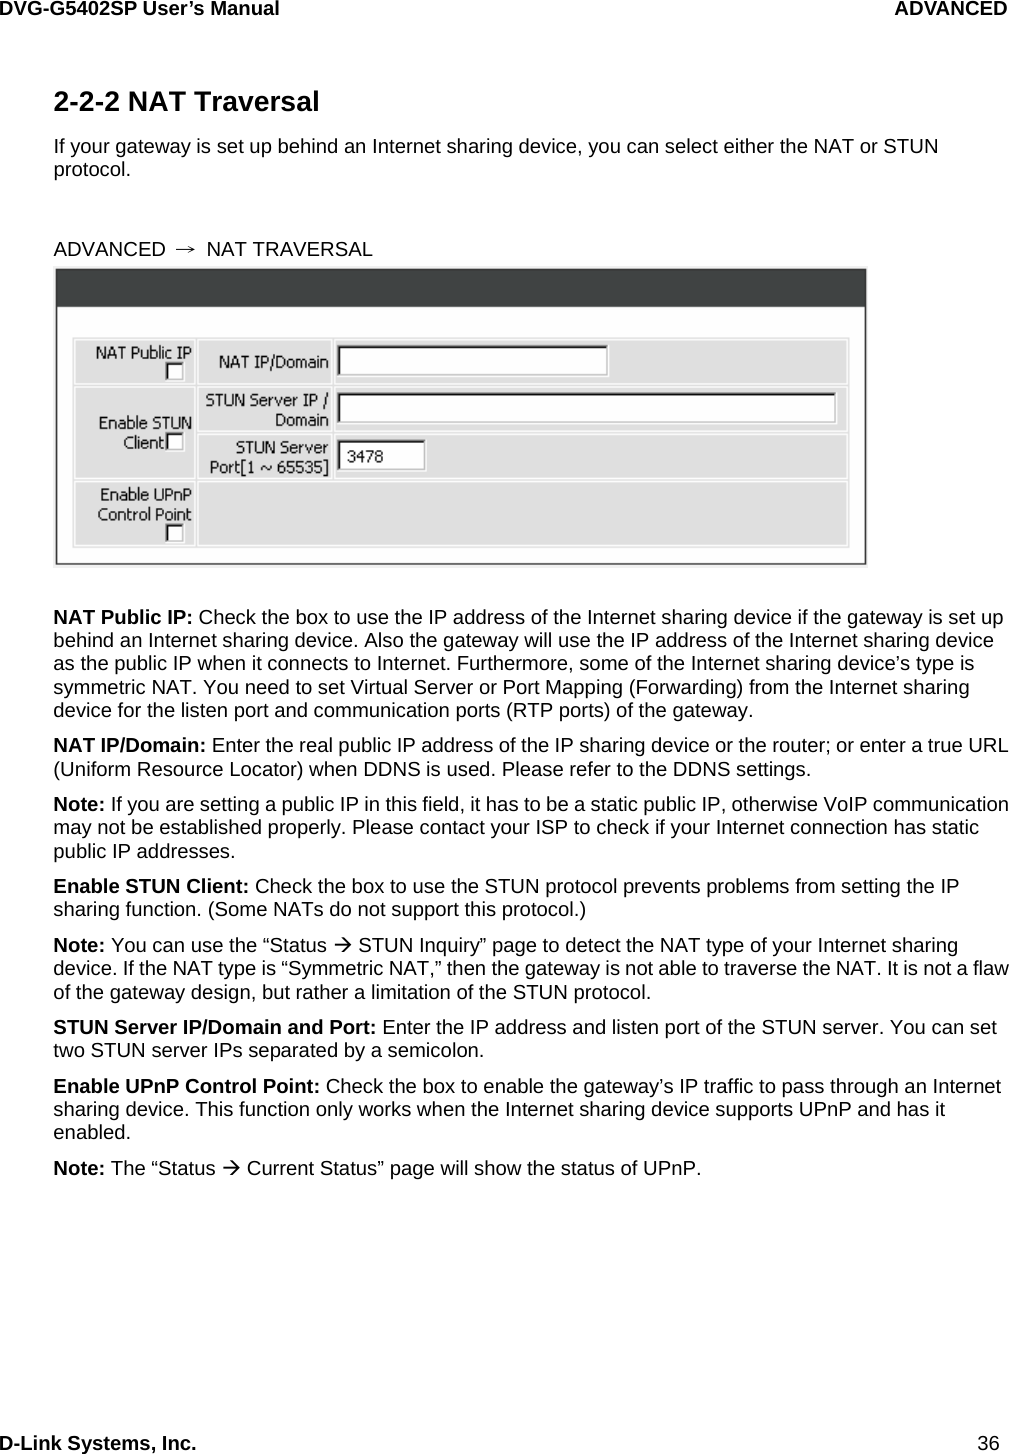 DVG-G5402SP User’s Manual                                   ADVANCED D-Link Systems, Inc.                                                                             36 2-2-2 NAT Traversal    If your gateway is set up behind an Internet sharing device, you can select either the NAT or STUN protocol.   ADVANCED  → NAT TRAVERSAL   NAT Public IP: Check the box to use the IP address of the Internet sharing device if the gateway is set up behind an Internet sharing device. Also the gateway will use the IP address of the Internet sharing device as the public IP when it connects to Internet. Furthermore, some of the Internet sharing device’s type is symmetric NAT. You need to set Virtual Server or Port Mapping (Forwarding) from the Internet sharing device for the listen port and communication ports (RTP ports) of the gateway. NAT IP/Domain: Enter the real public IP address of the IP sharing device or the router; or enter a true URL (Uniform Resource Locator) when DDNS is used. Please refer to the DDNS settings. Note: If you are setting a public IP in this field, it has to be a static public IP, otherwise VoIP communication may not be established properly. Please contact your ISP to check if your Internet connection has static public IP addresses. Enable STUN Client: Check the box to use the STUN protocol prevents problems from setting the IP sharing function. (Some NATs do not support this protocol.) Note: You can use the “Status Æ STUN Inquiry” page to detect the NAT type of your Internet sharing device. If the NAT type is “Symmetric NAT,” then the gateway is not able to traverse the NAT. It is not a flaw of the gateway design, but rather a limitation of the STUN protocol. STUN Server IP/Domain and Port: Enter the IP address and listen port of the STUN server. You can set two STUN server IPs separated by a semicolon. Enable UPnP Control Point: Check the box to enable the gateway’s IP traffic to pass through an Internet sharing device. This function only works when the Internet sharing device supports UPnP and has it enabled. Note: The “Status Æ Current Status” page will show the status of UPnP. 